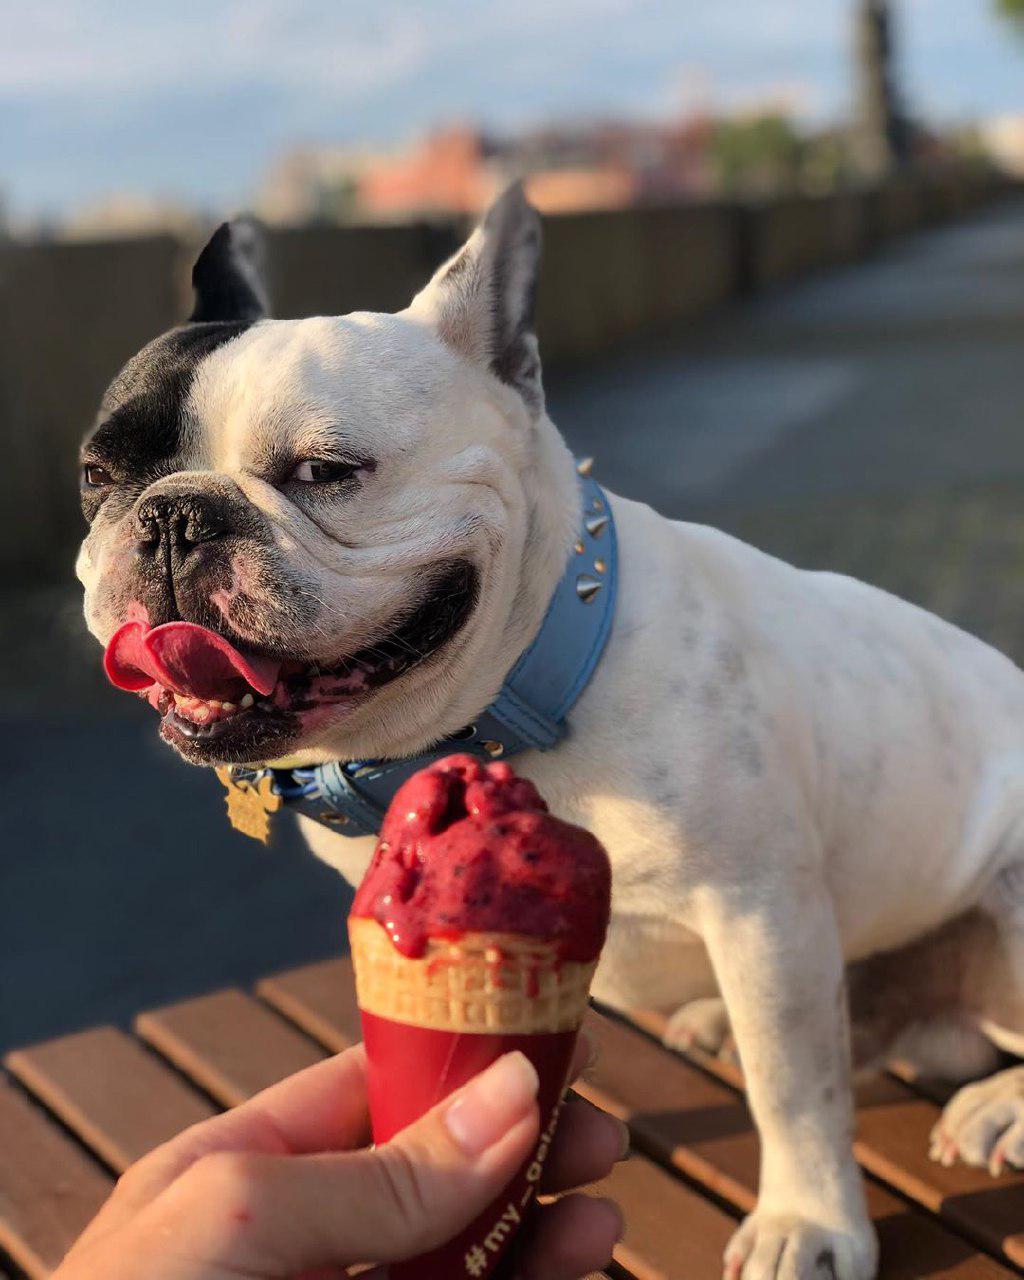 A French Bulldog sitting on top of the wooden bench behind the icecream in a cone in the hand of a woman